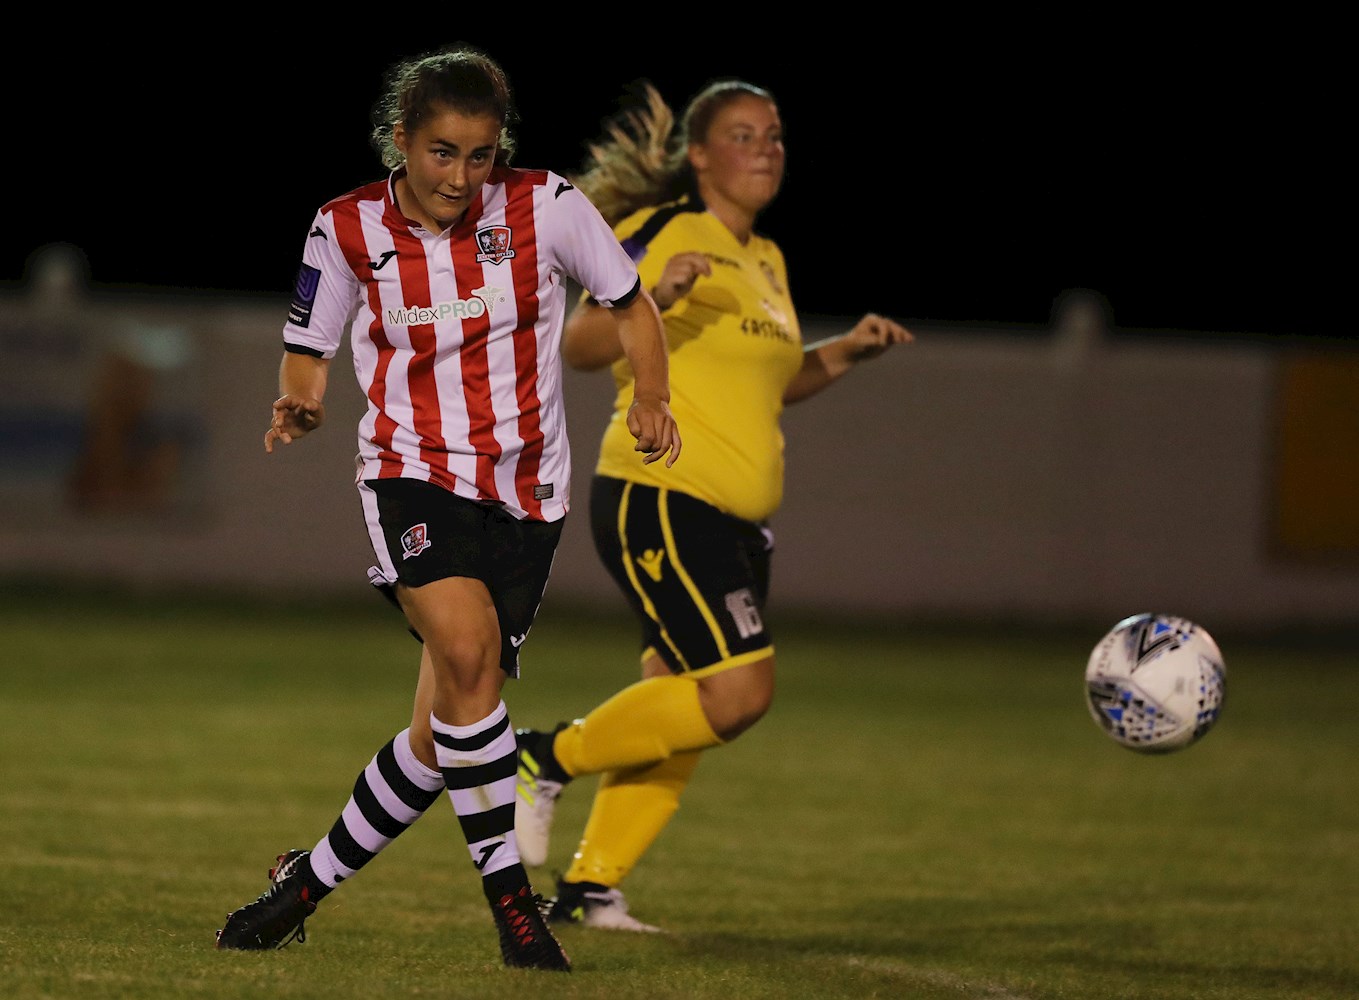 Georgie Barbour in action for the ECFC Women's team.jpg